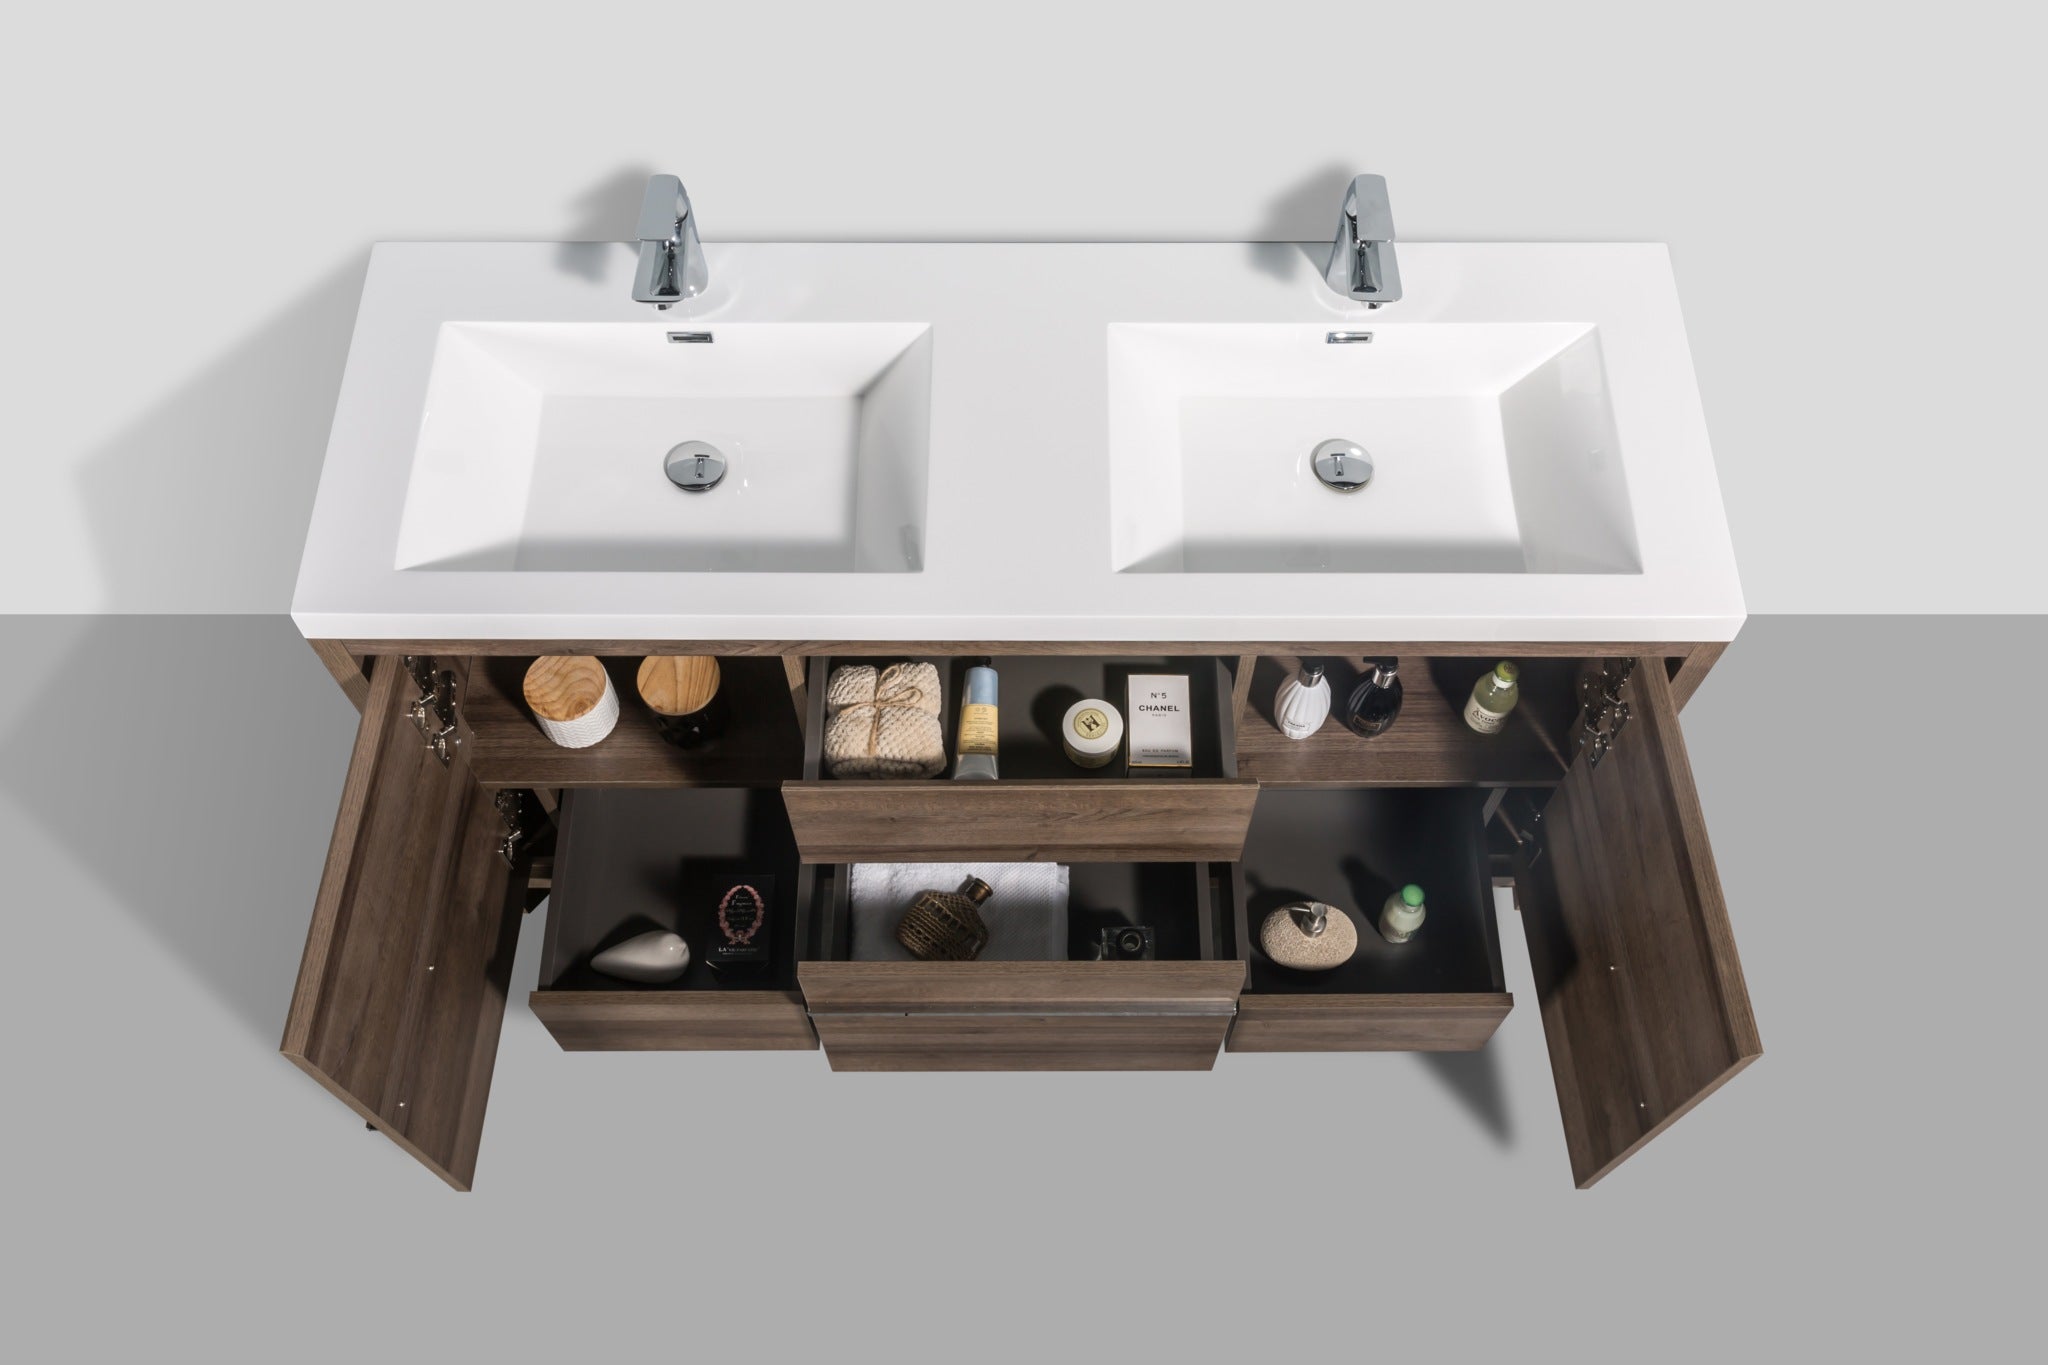 Granada 59 Brown Oak With Chrome Handle Cabinet, Square Cultured Marble Double Sink, Free Standing Modern Vanity Set